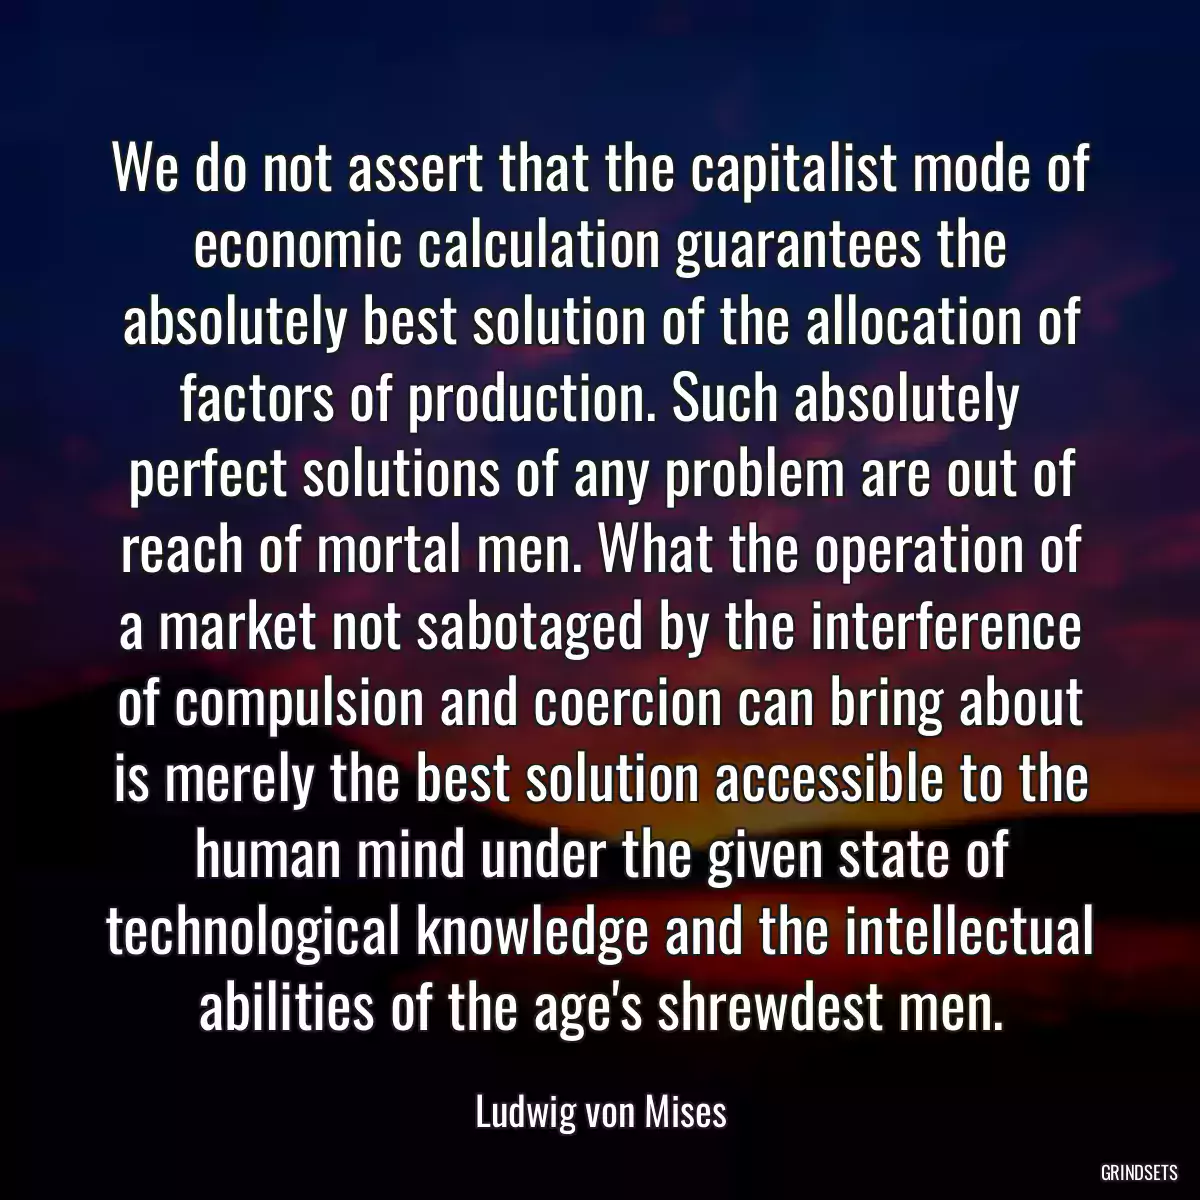 We do not assert that the capitalist mode of economic calculation guarantees the absolutely best solution of the allocation of factors of production. Such absolutely perfect solutions of any problem are out of reach of mortal men. What the operation of a market not sabotaged by the interference of compulsion and coercion can bring about is merely the best solution accessible to the human mind under the given state of technological knowledge and the intellectual abilities of the age\'s shrewdest men.